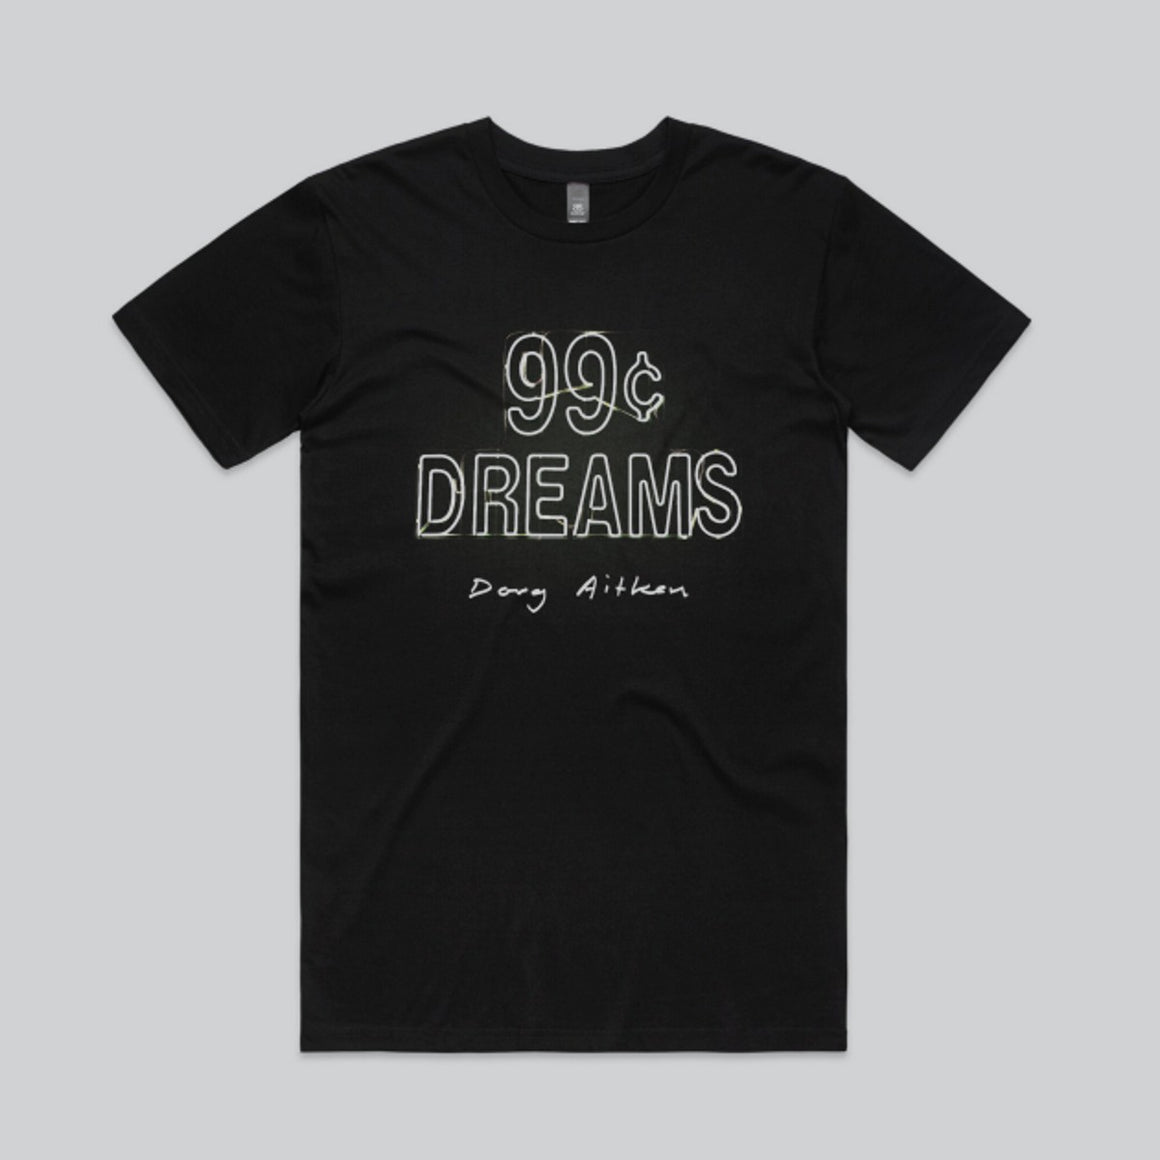 A black t-shirt has "99c dreams" capitalised and outlined as a neon sign with "Doug Aitken" below it in Aitken's handwriting. 